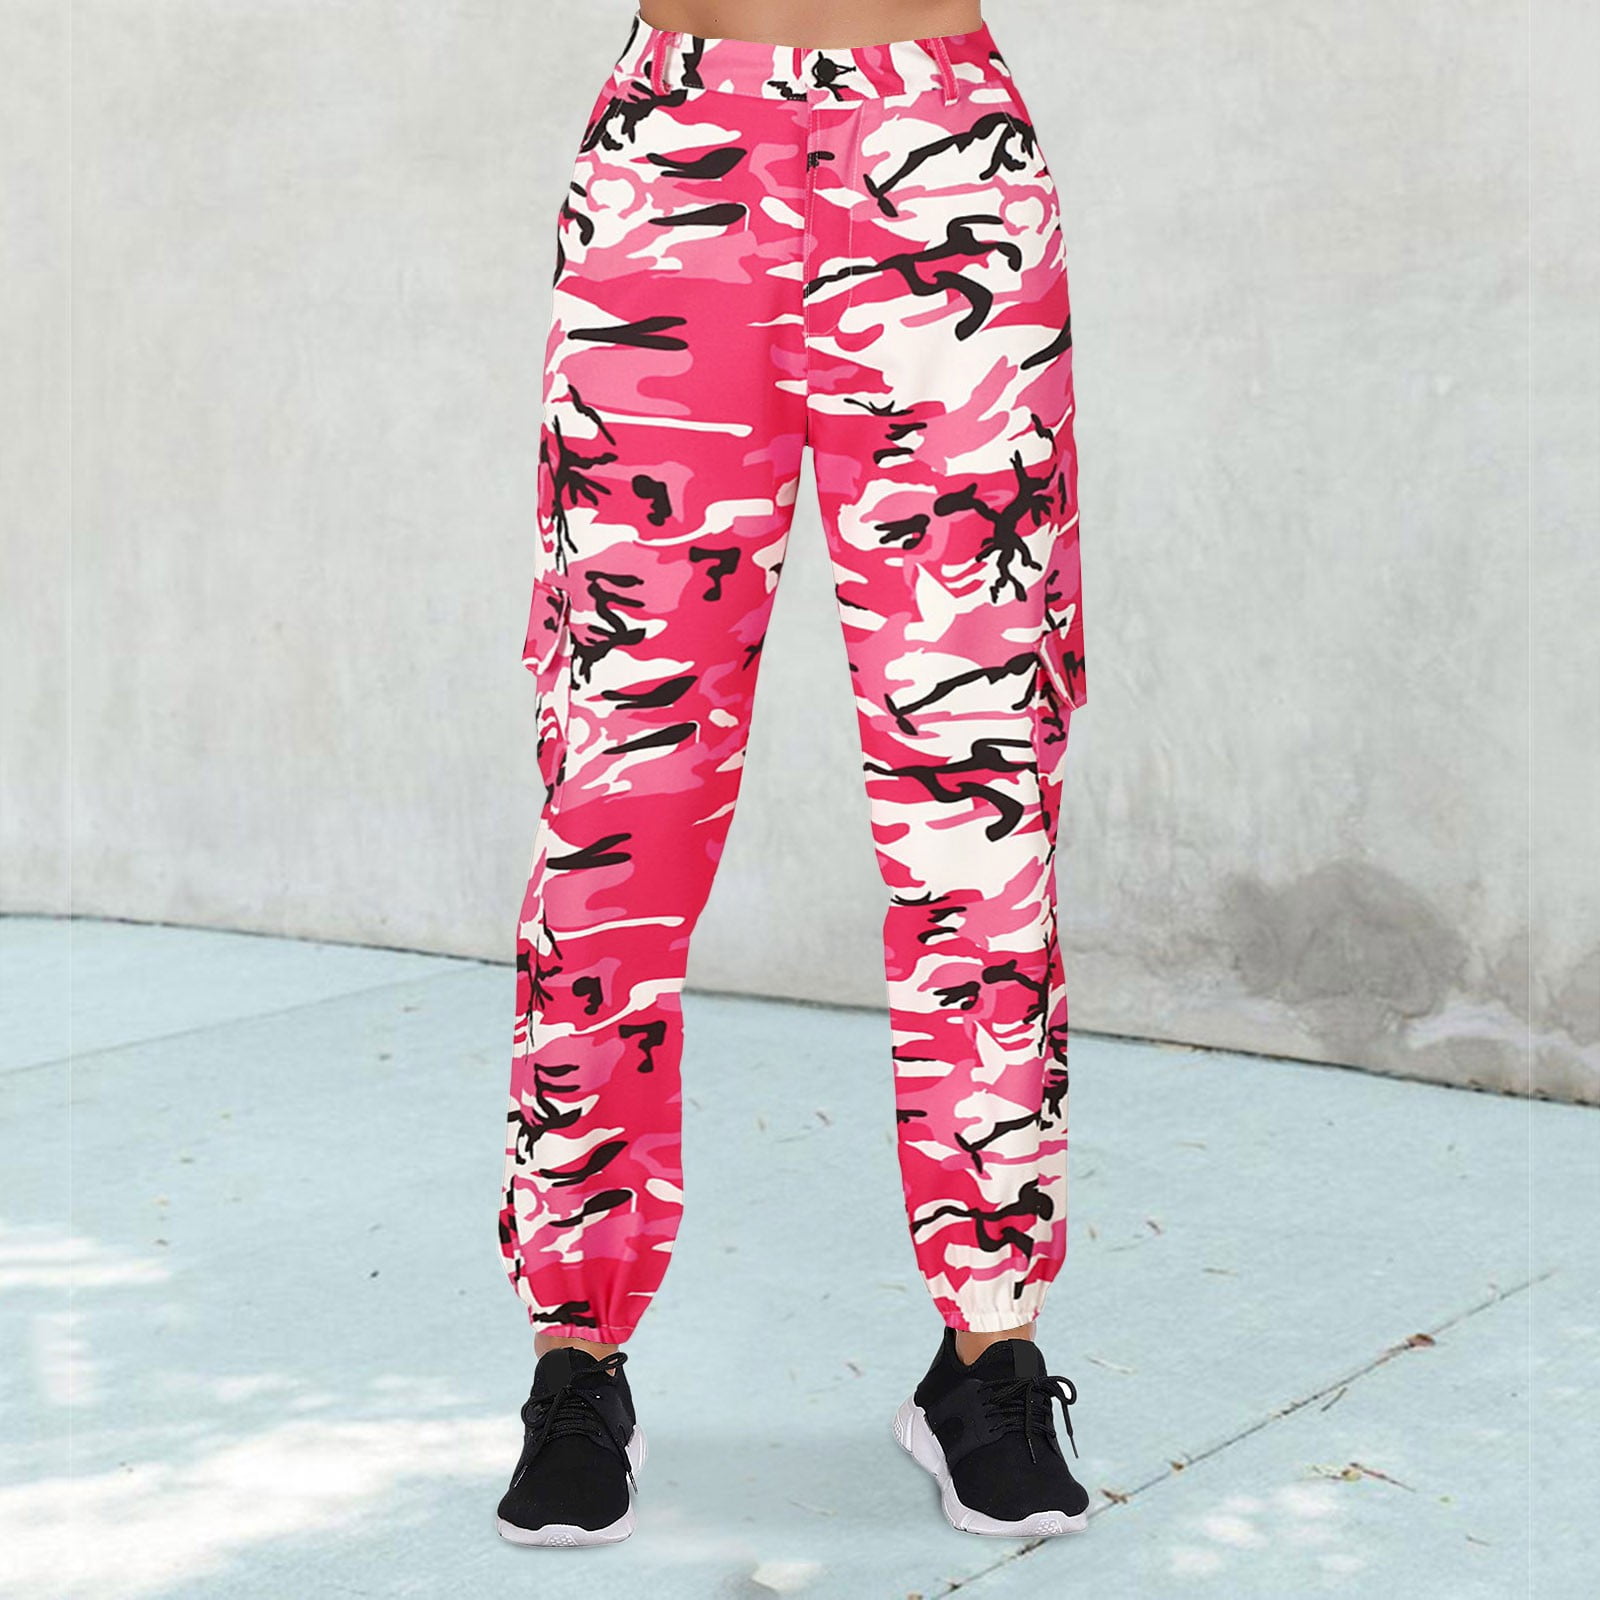 JWZUY Women's Camo Pants Cargo Trousers Cool Camouflage Pants Button Zippe  Up Elastic Waist Casual Multi Outdoor Jogger Pants with Pocket Hot Pink L